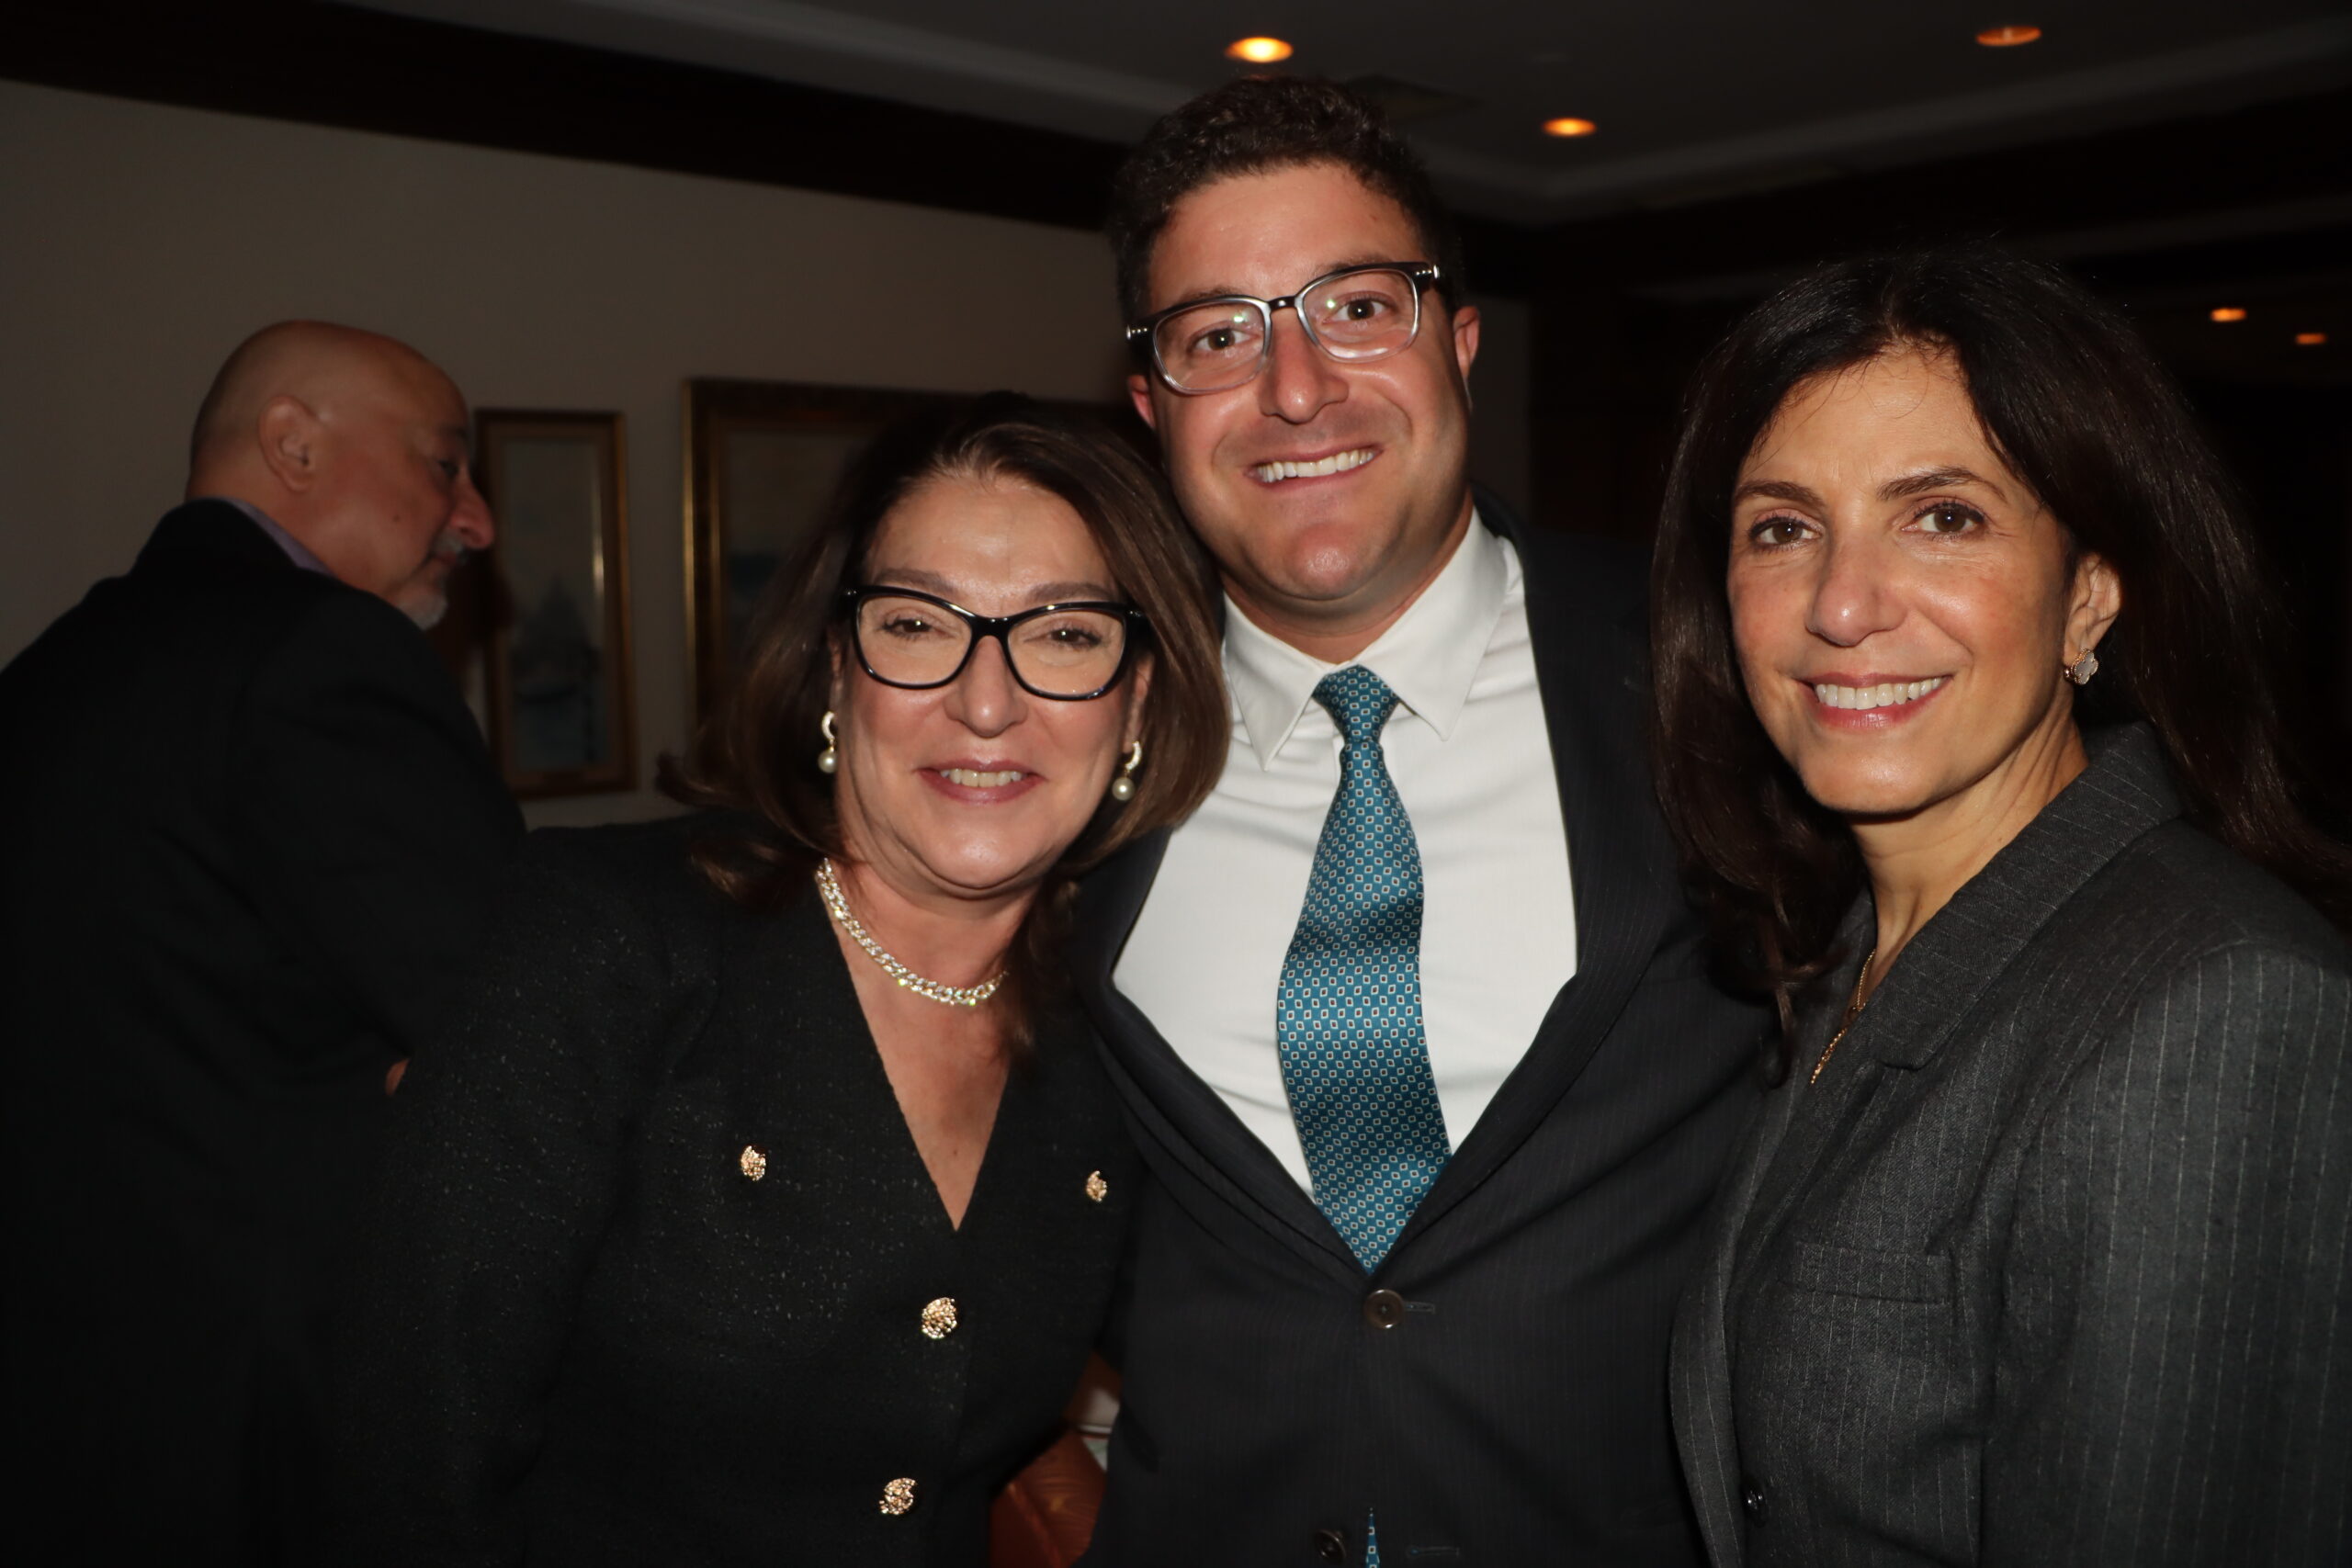 From left: Suzanne Genusa, Gregory J. Cerchione and Hon. Rosemarie Montalbano at Columbian Lawyers Association annual Italian Heritage event.